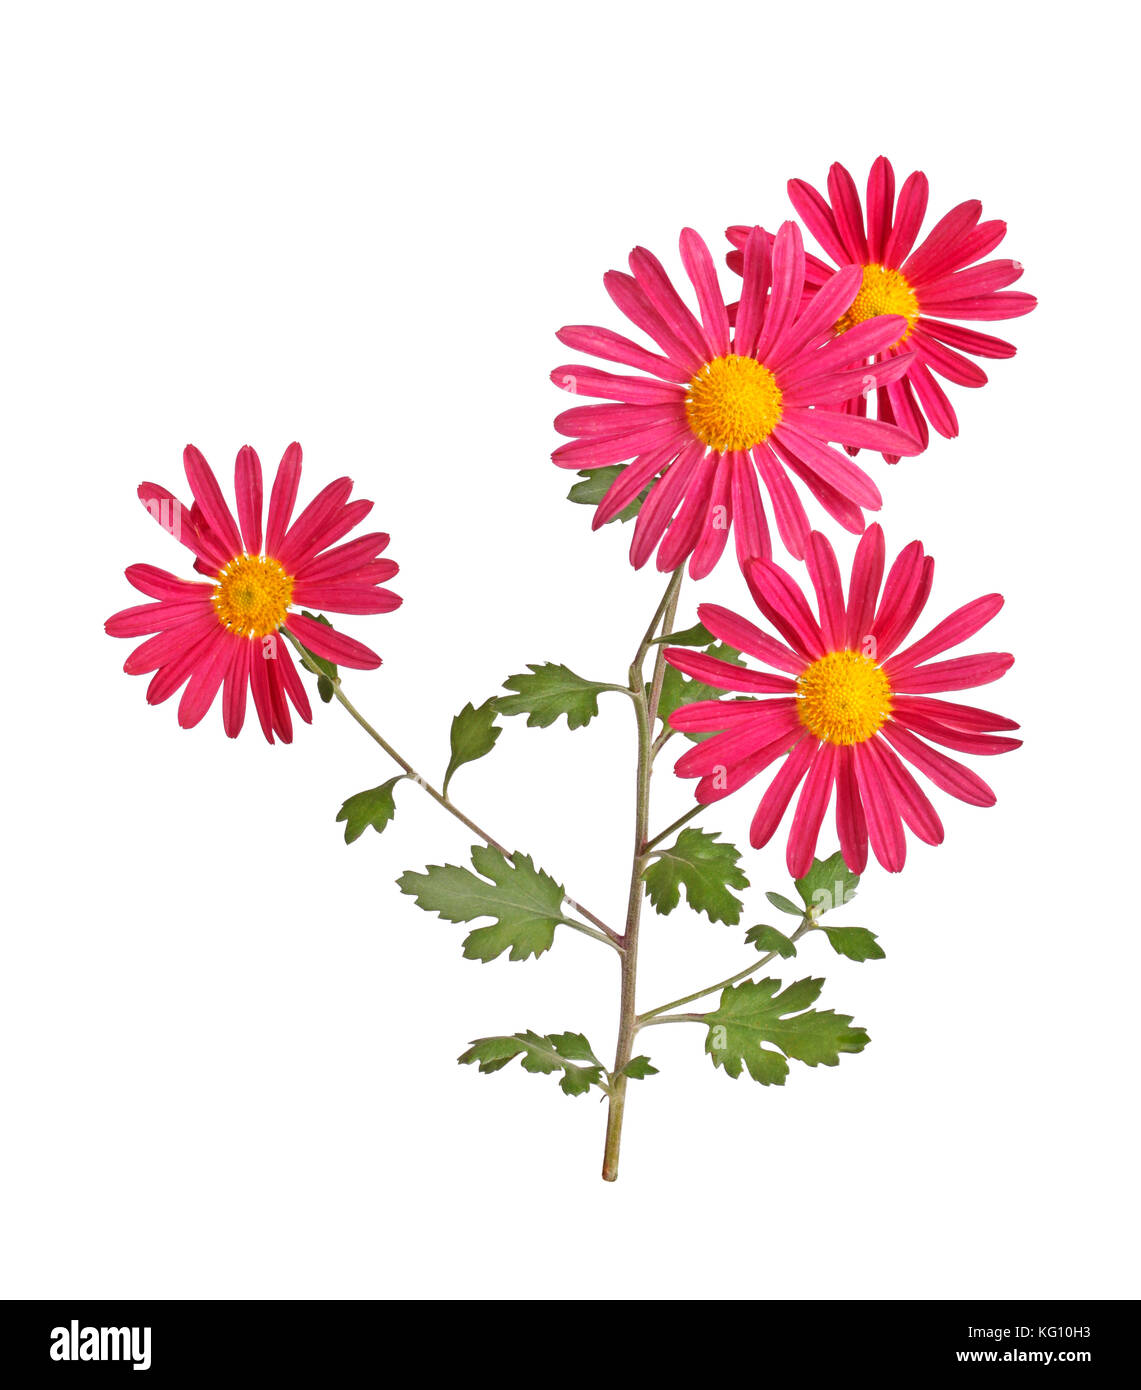 Stem with several red and yellow flowers of the hardy chrysanthemum (Chrysanthemum rubellum) isolated against a white background Stock Photo